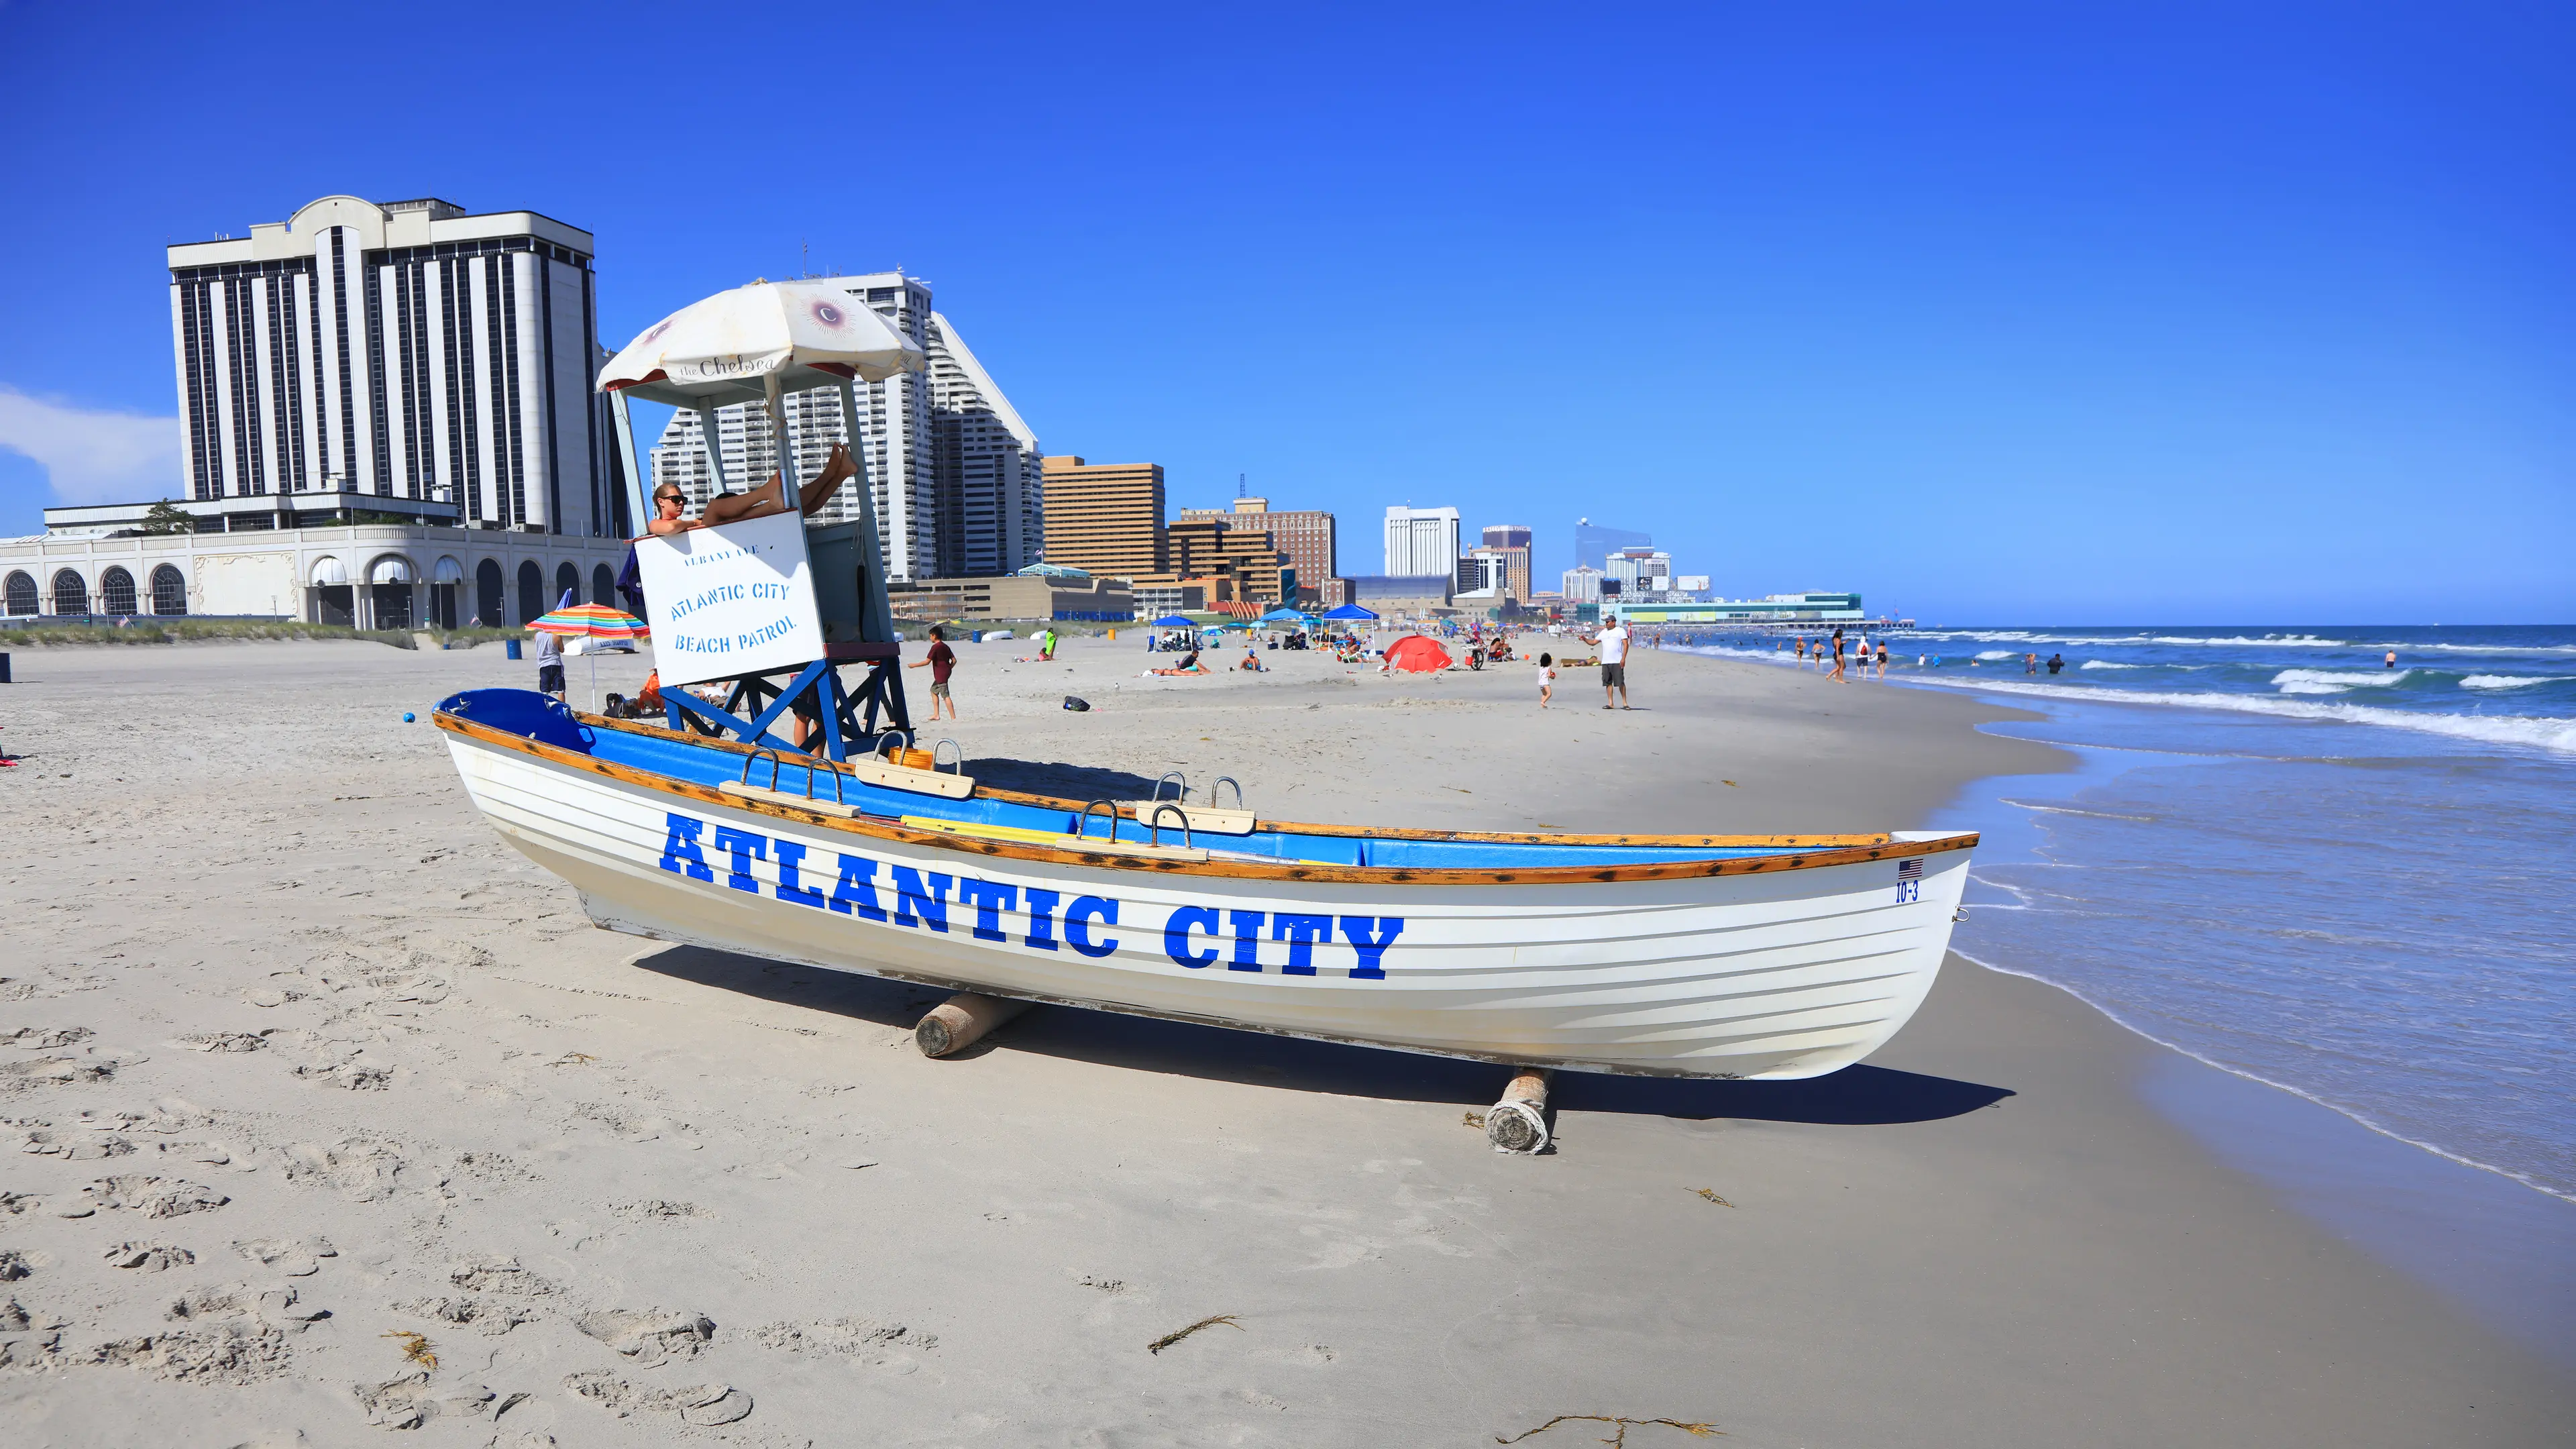 Life guard boat on the beach in Atlantic City, New Jersey